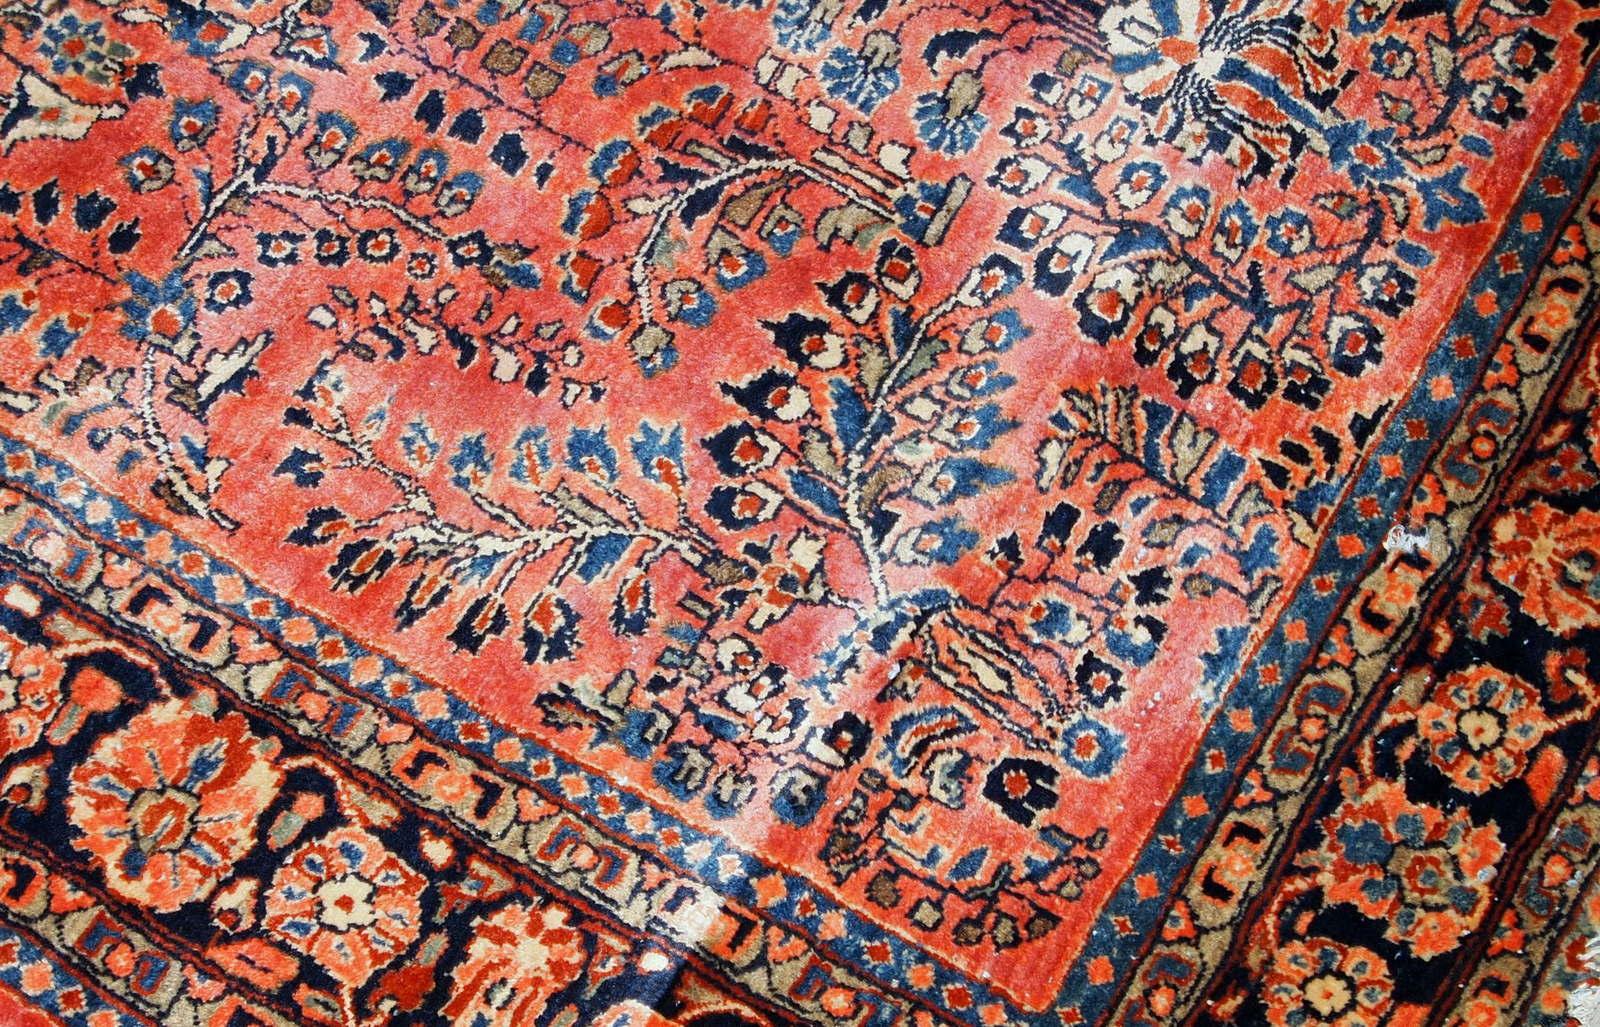 Handmade antique Sarouk rug fin original good condition. The rug has been made in the beginning of 20th century in red wool.

?-Condition: original good,

-circa 1920s,

-Size: 4' x 6.8' (122cm x 207cm),

-Material: wool,

-Country of